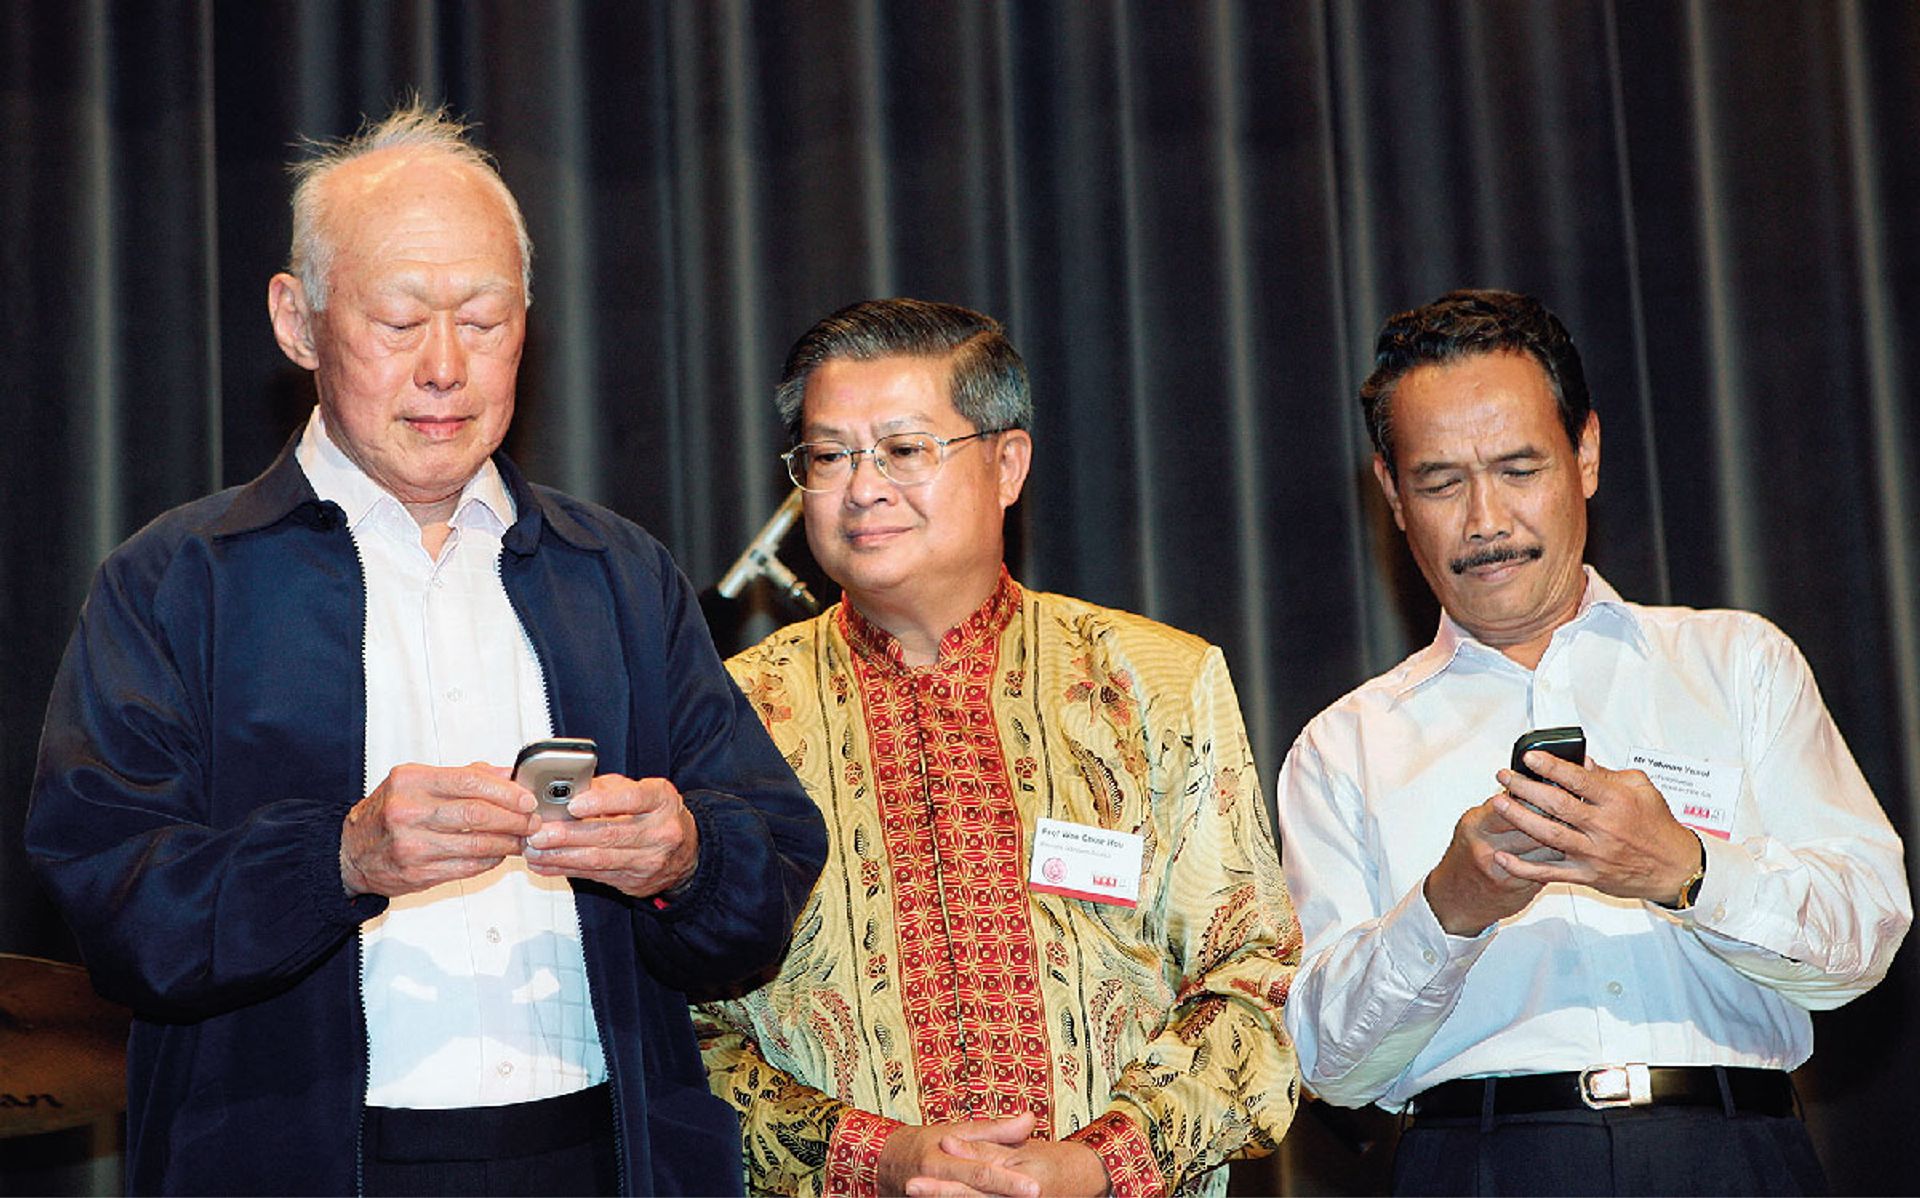 At the Speak Mandarin Campaign’s anniversary in 2004, Mr Lee sent out an SMS message in Chinese. With him is Promote Mandarin Council chairman Wee Chow Hou (centre) and Mr Yatiman Yusof, Senior Parliamentary Secretary for the Ministry of Information, Communications and the Arts. ST Photo: Lau Fook Kong